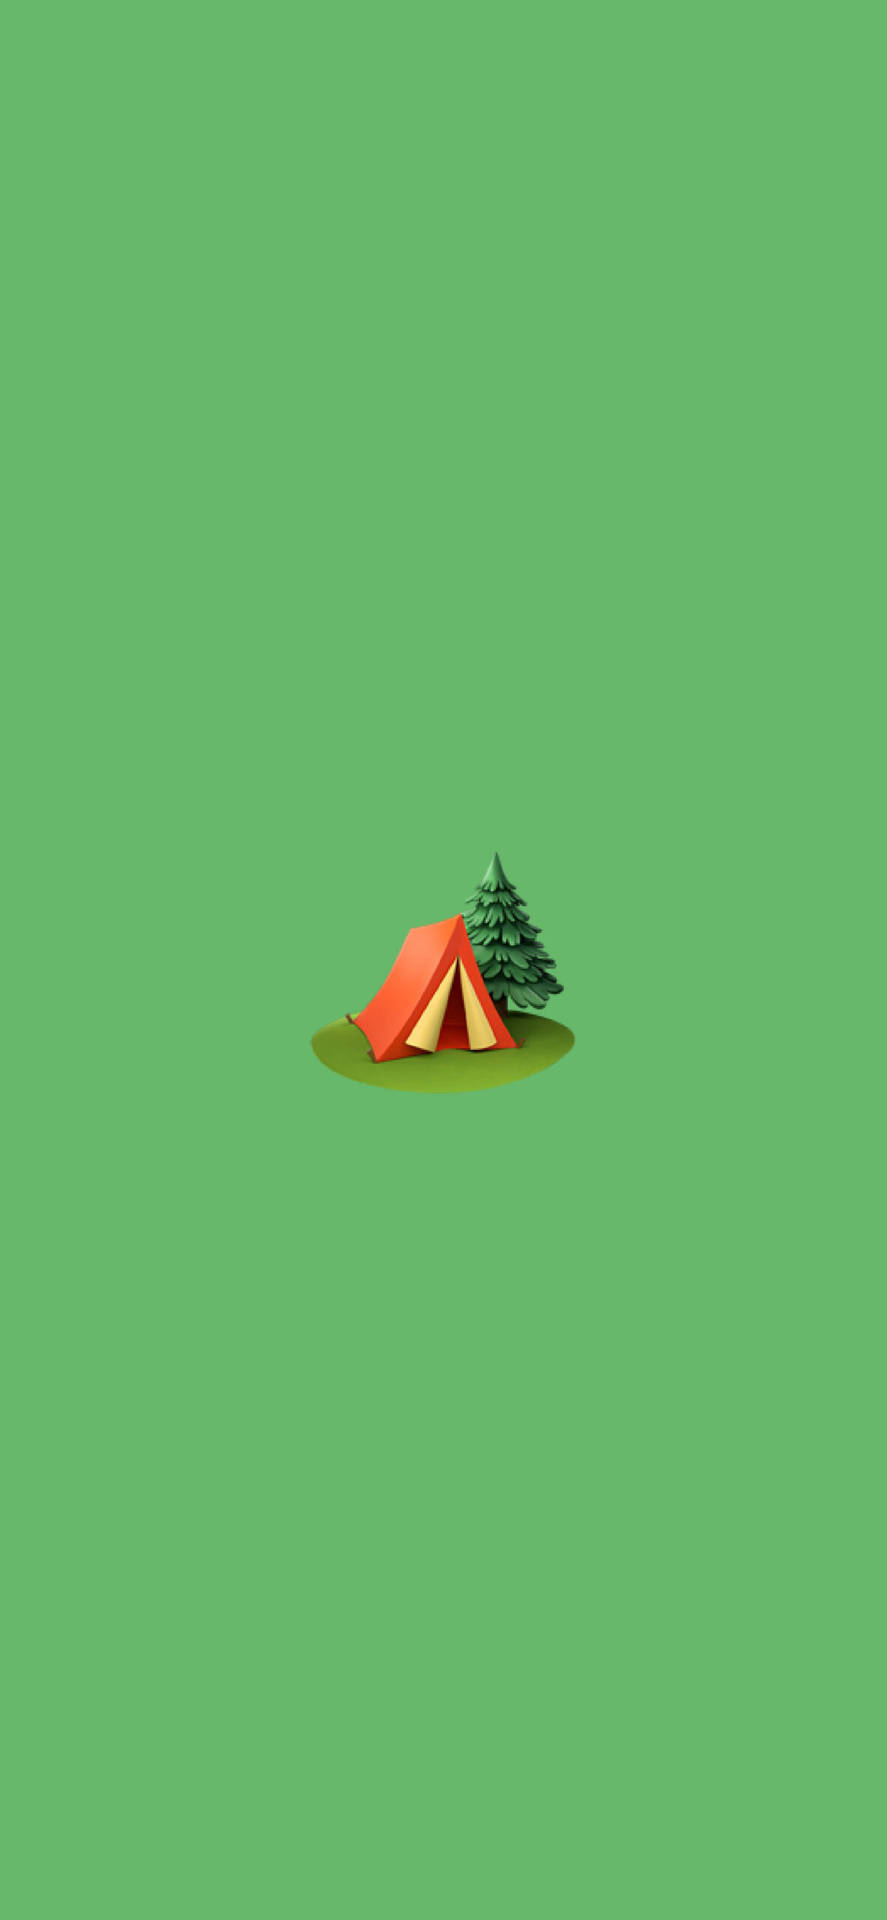 Camp Camp Tent In Green